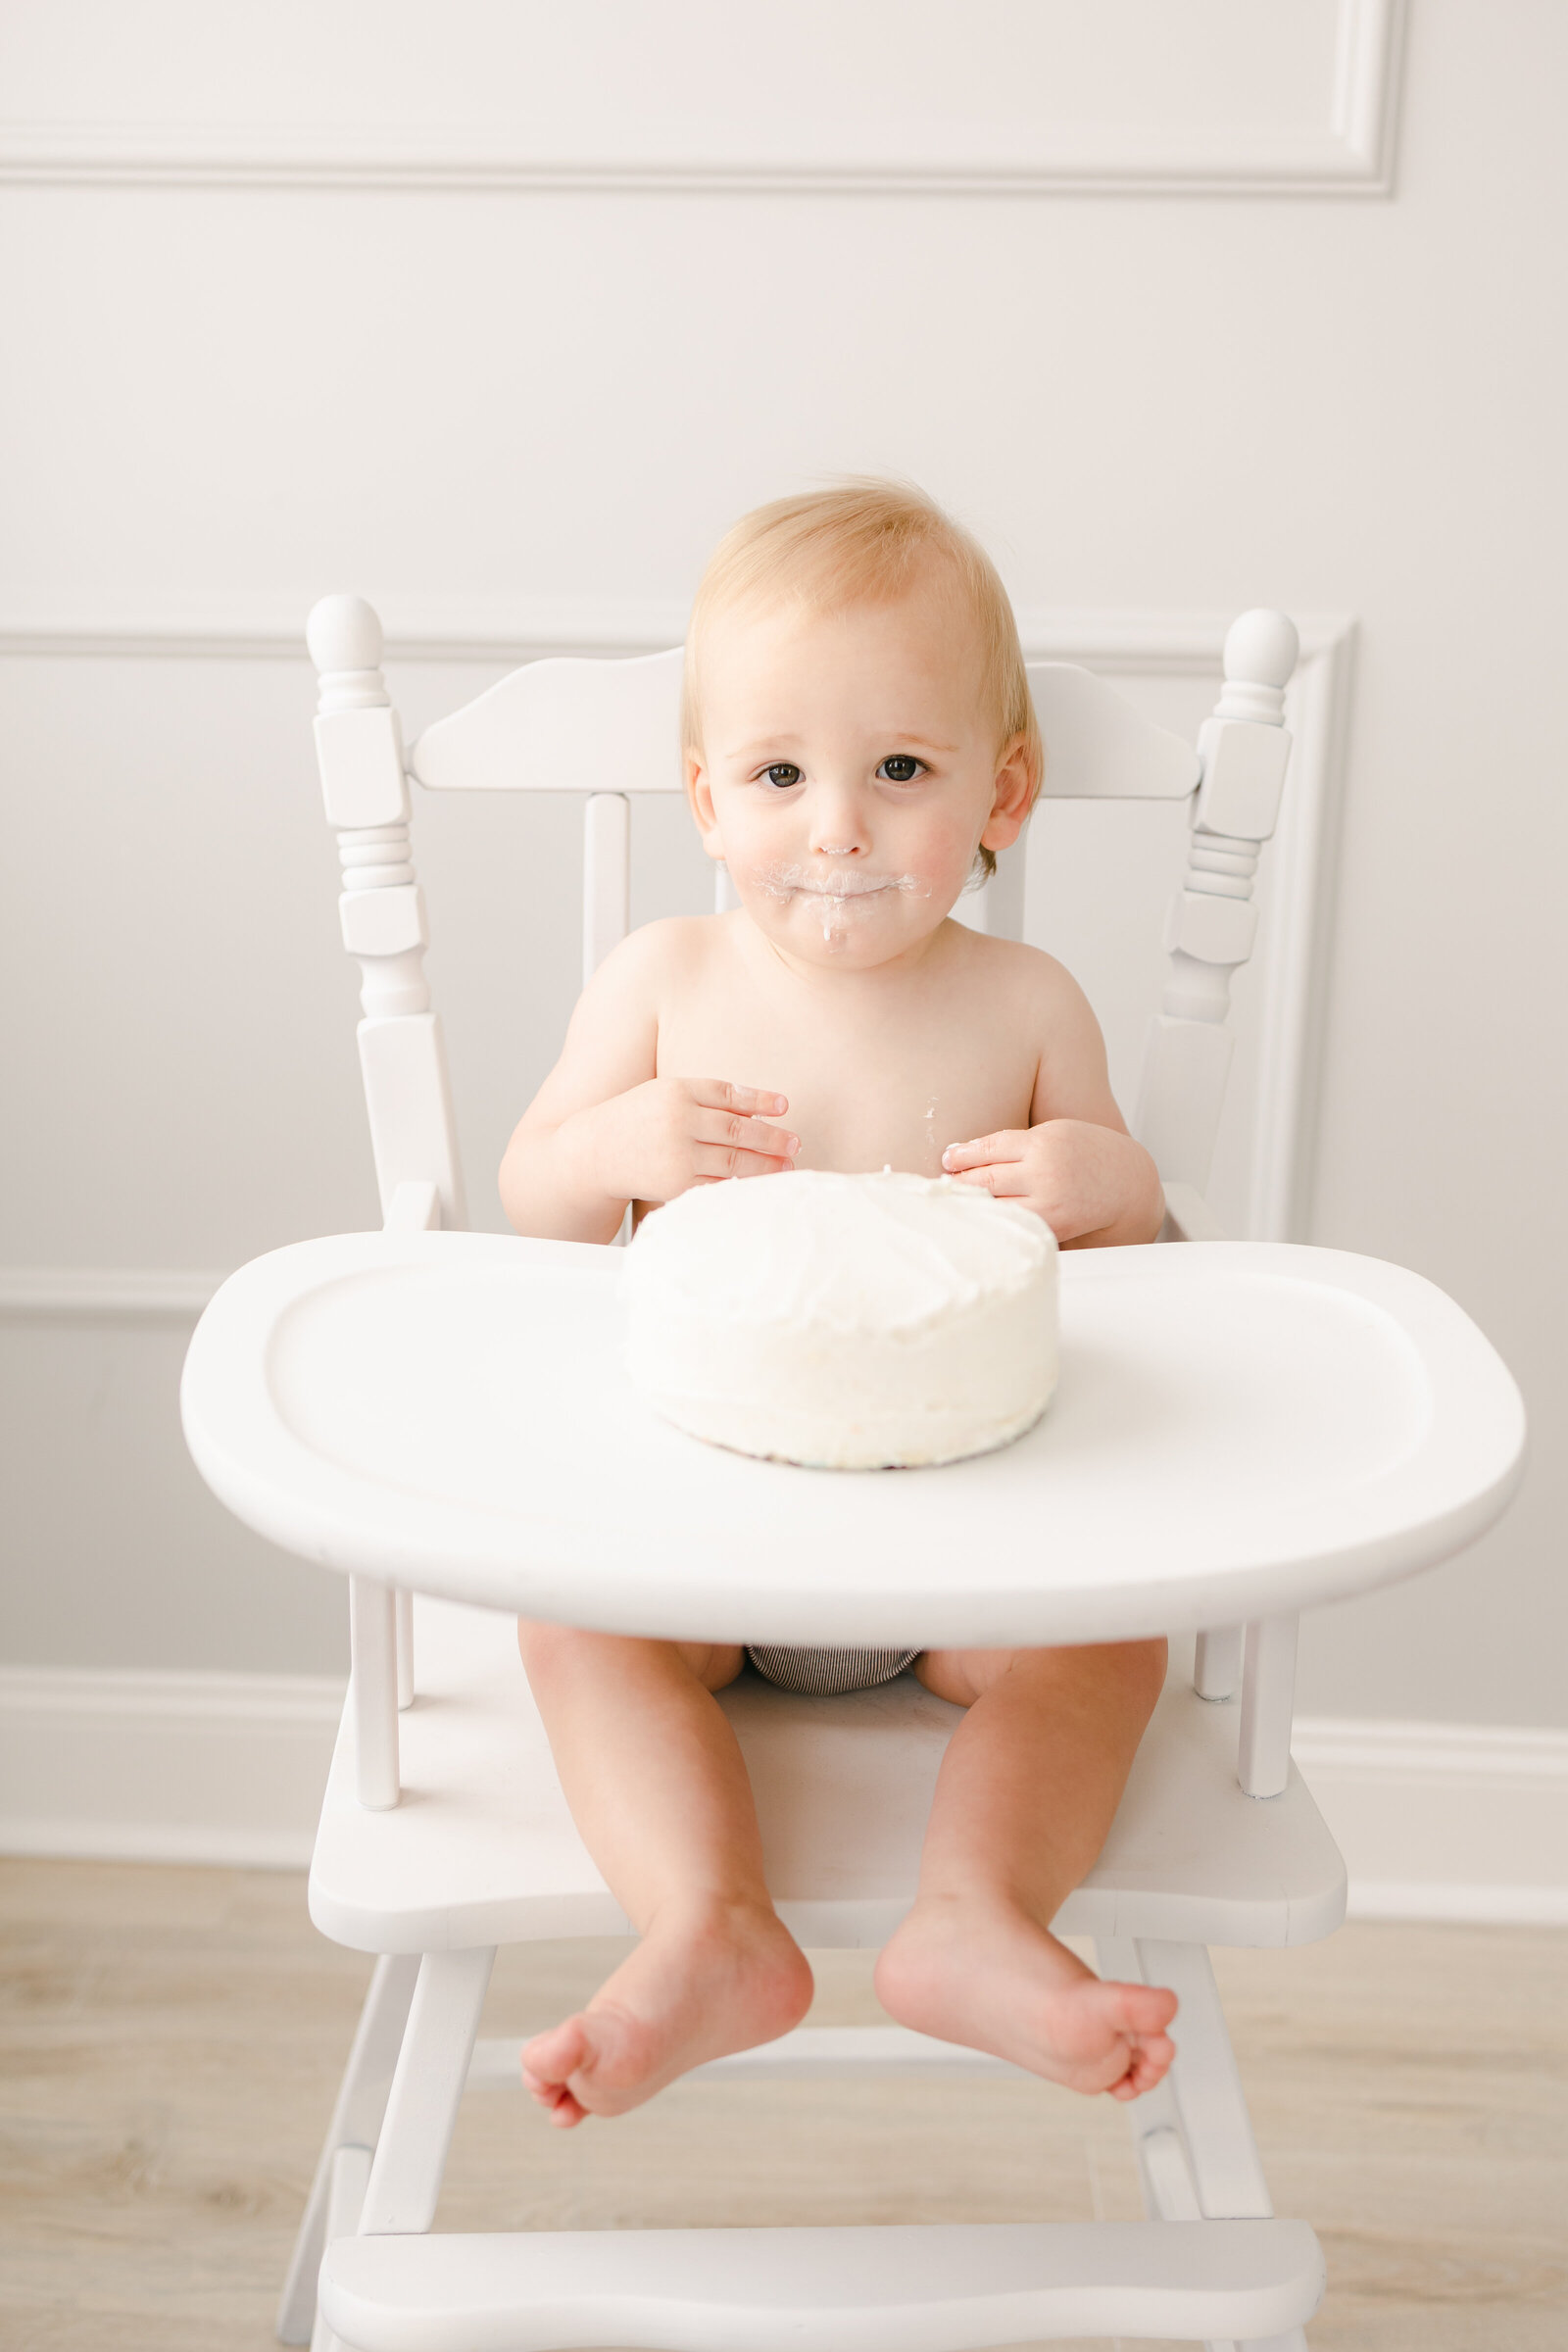 Baby boy sitting in a white high chair with a white cake in front of him waiting to be smashed